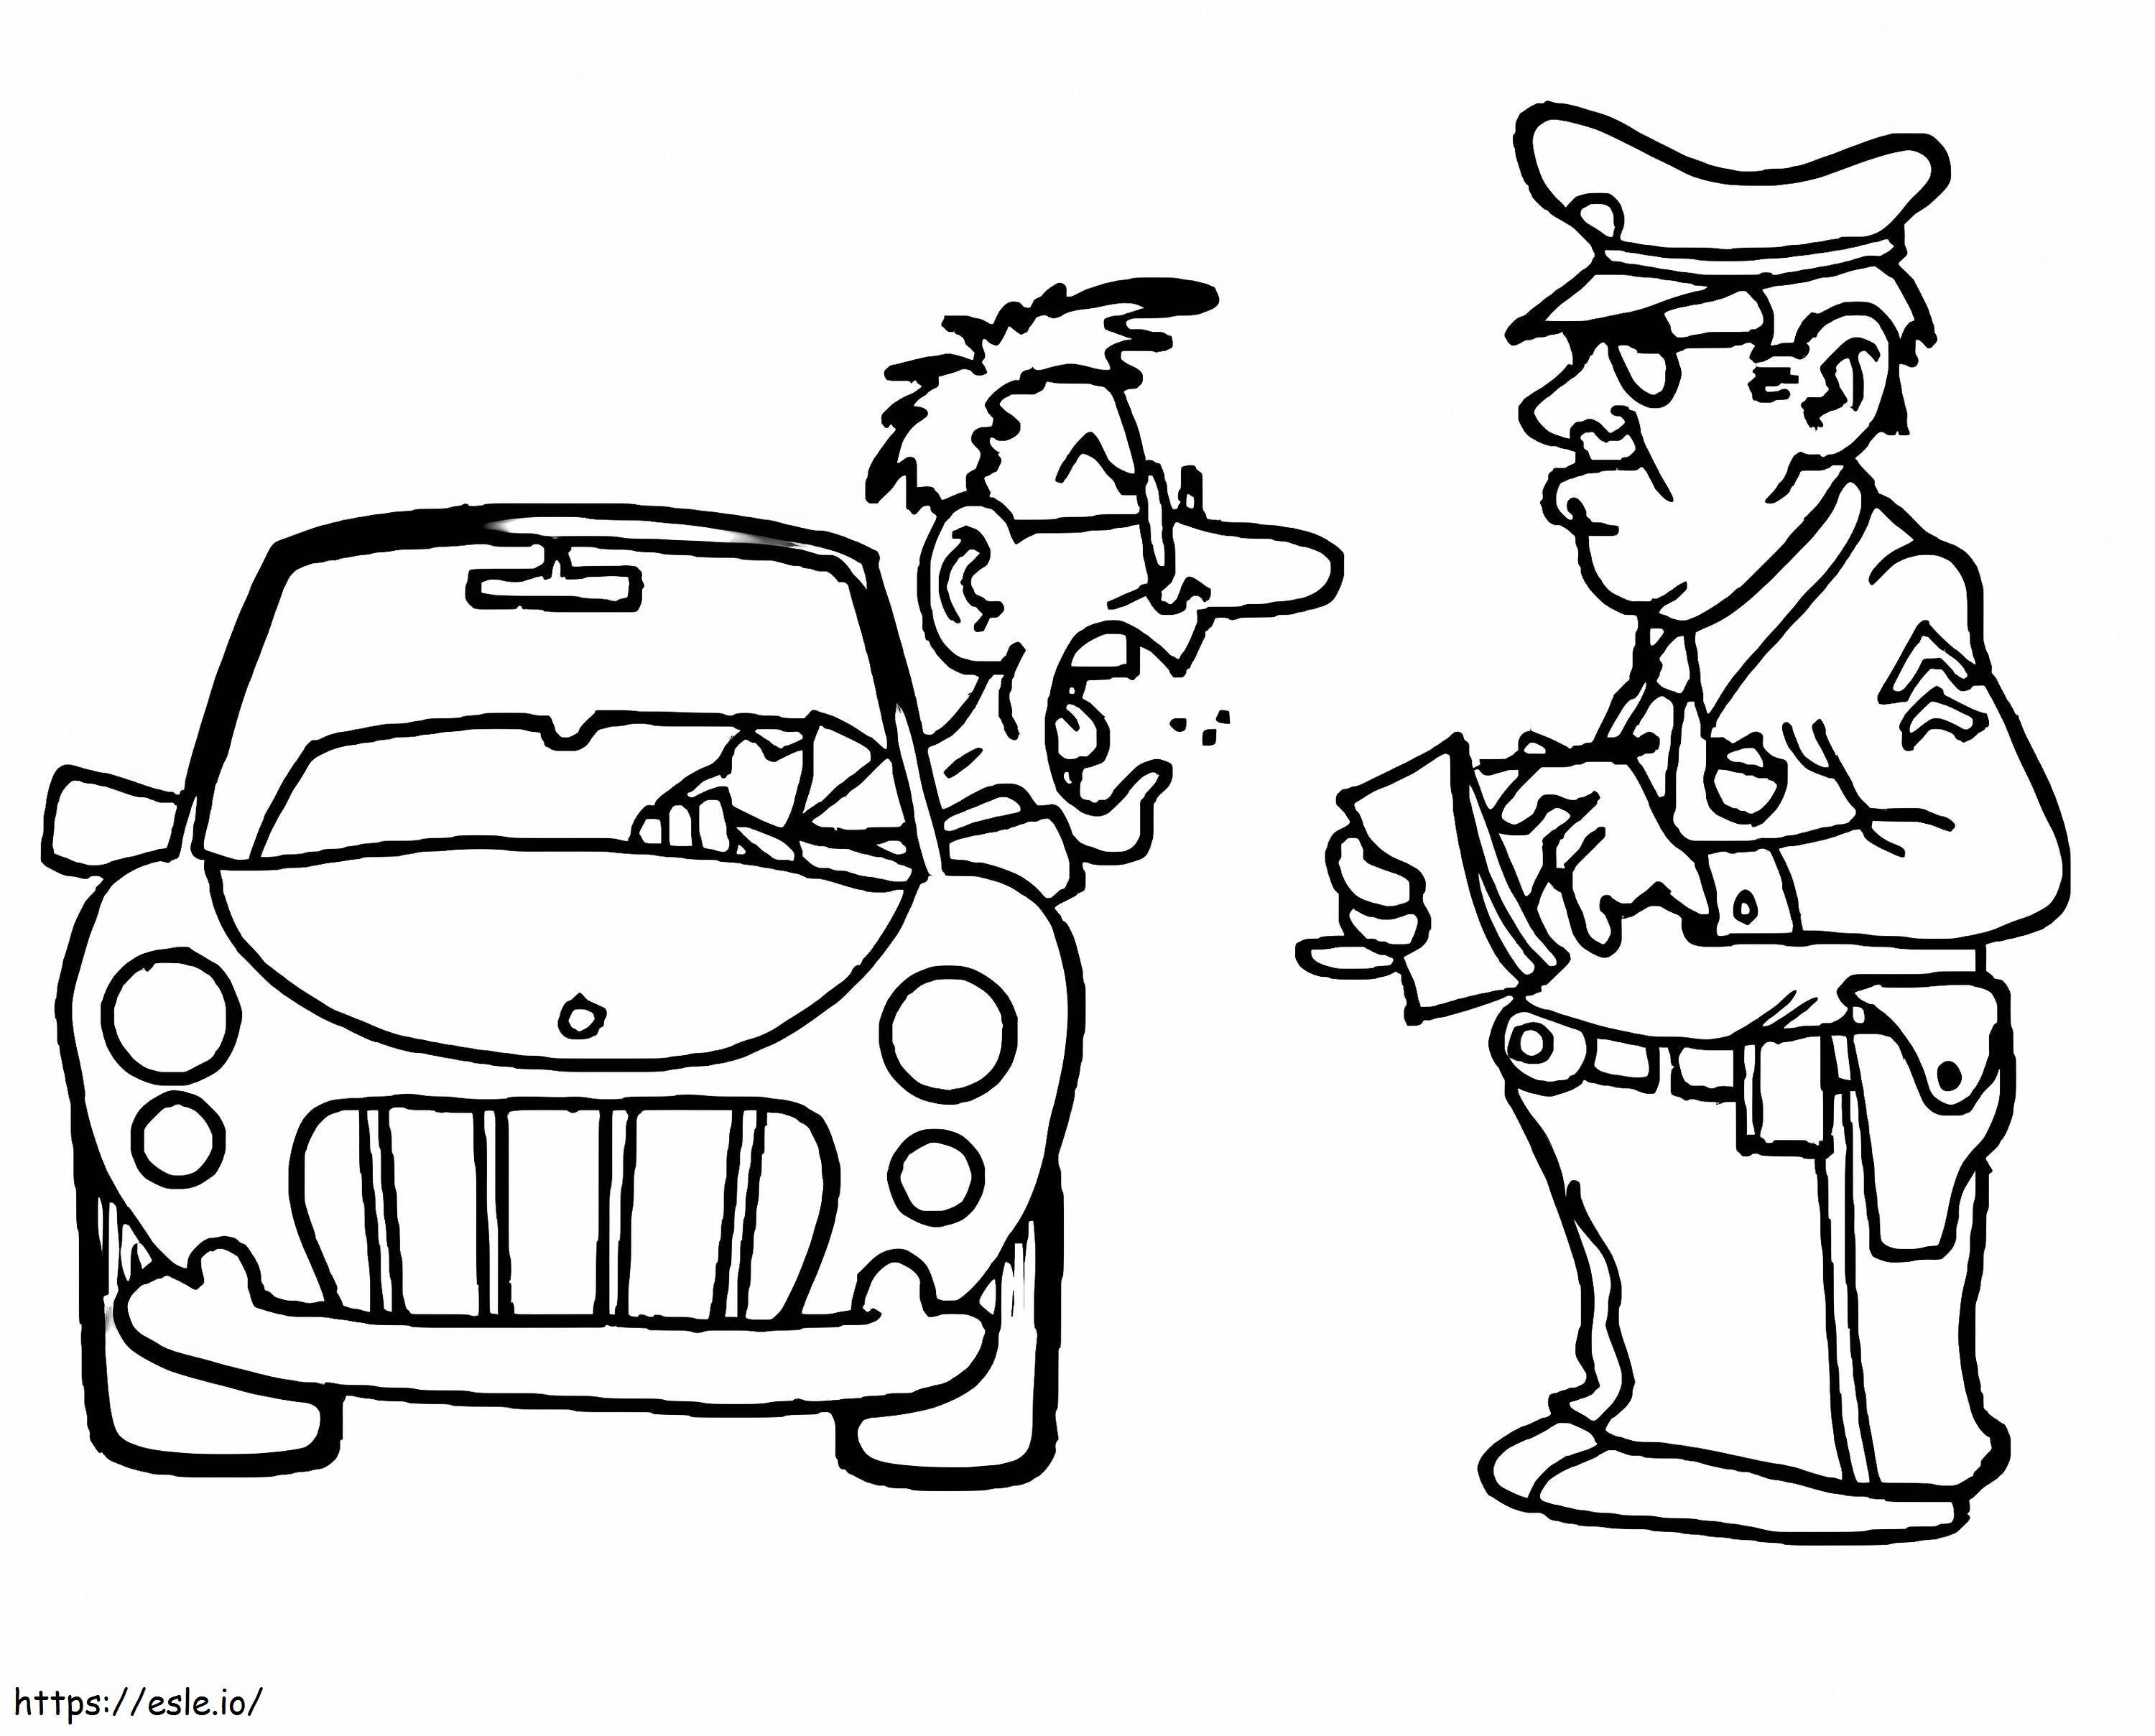 Traffic Police Coloring Page coloring page